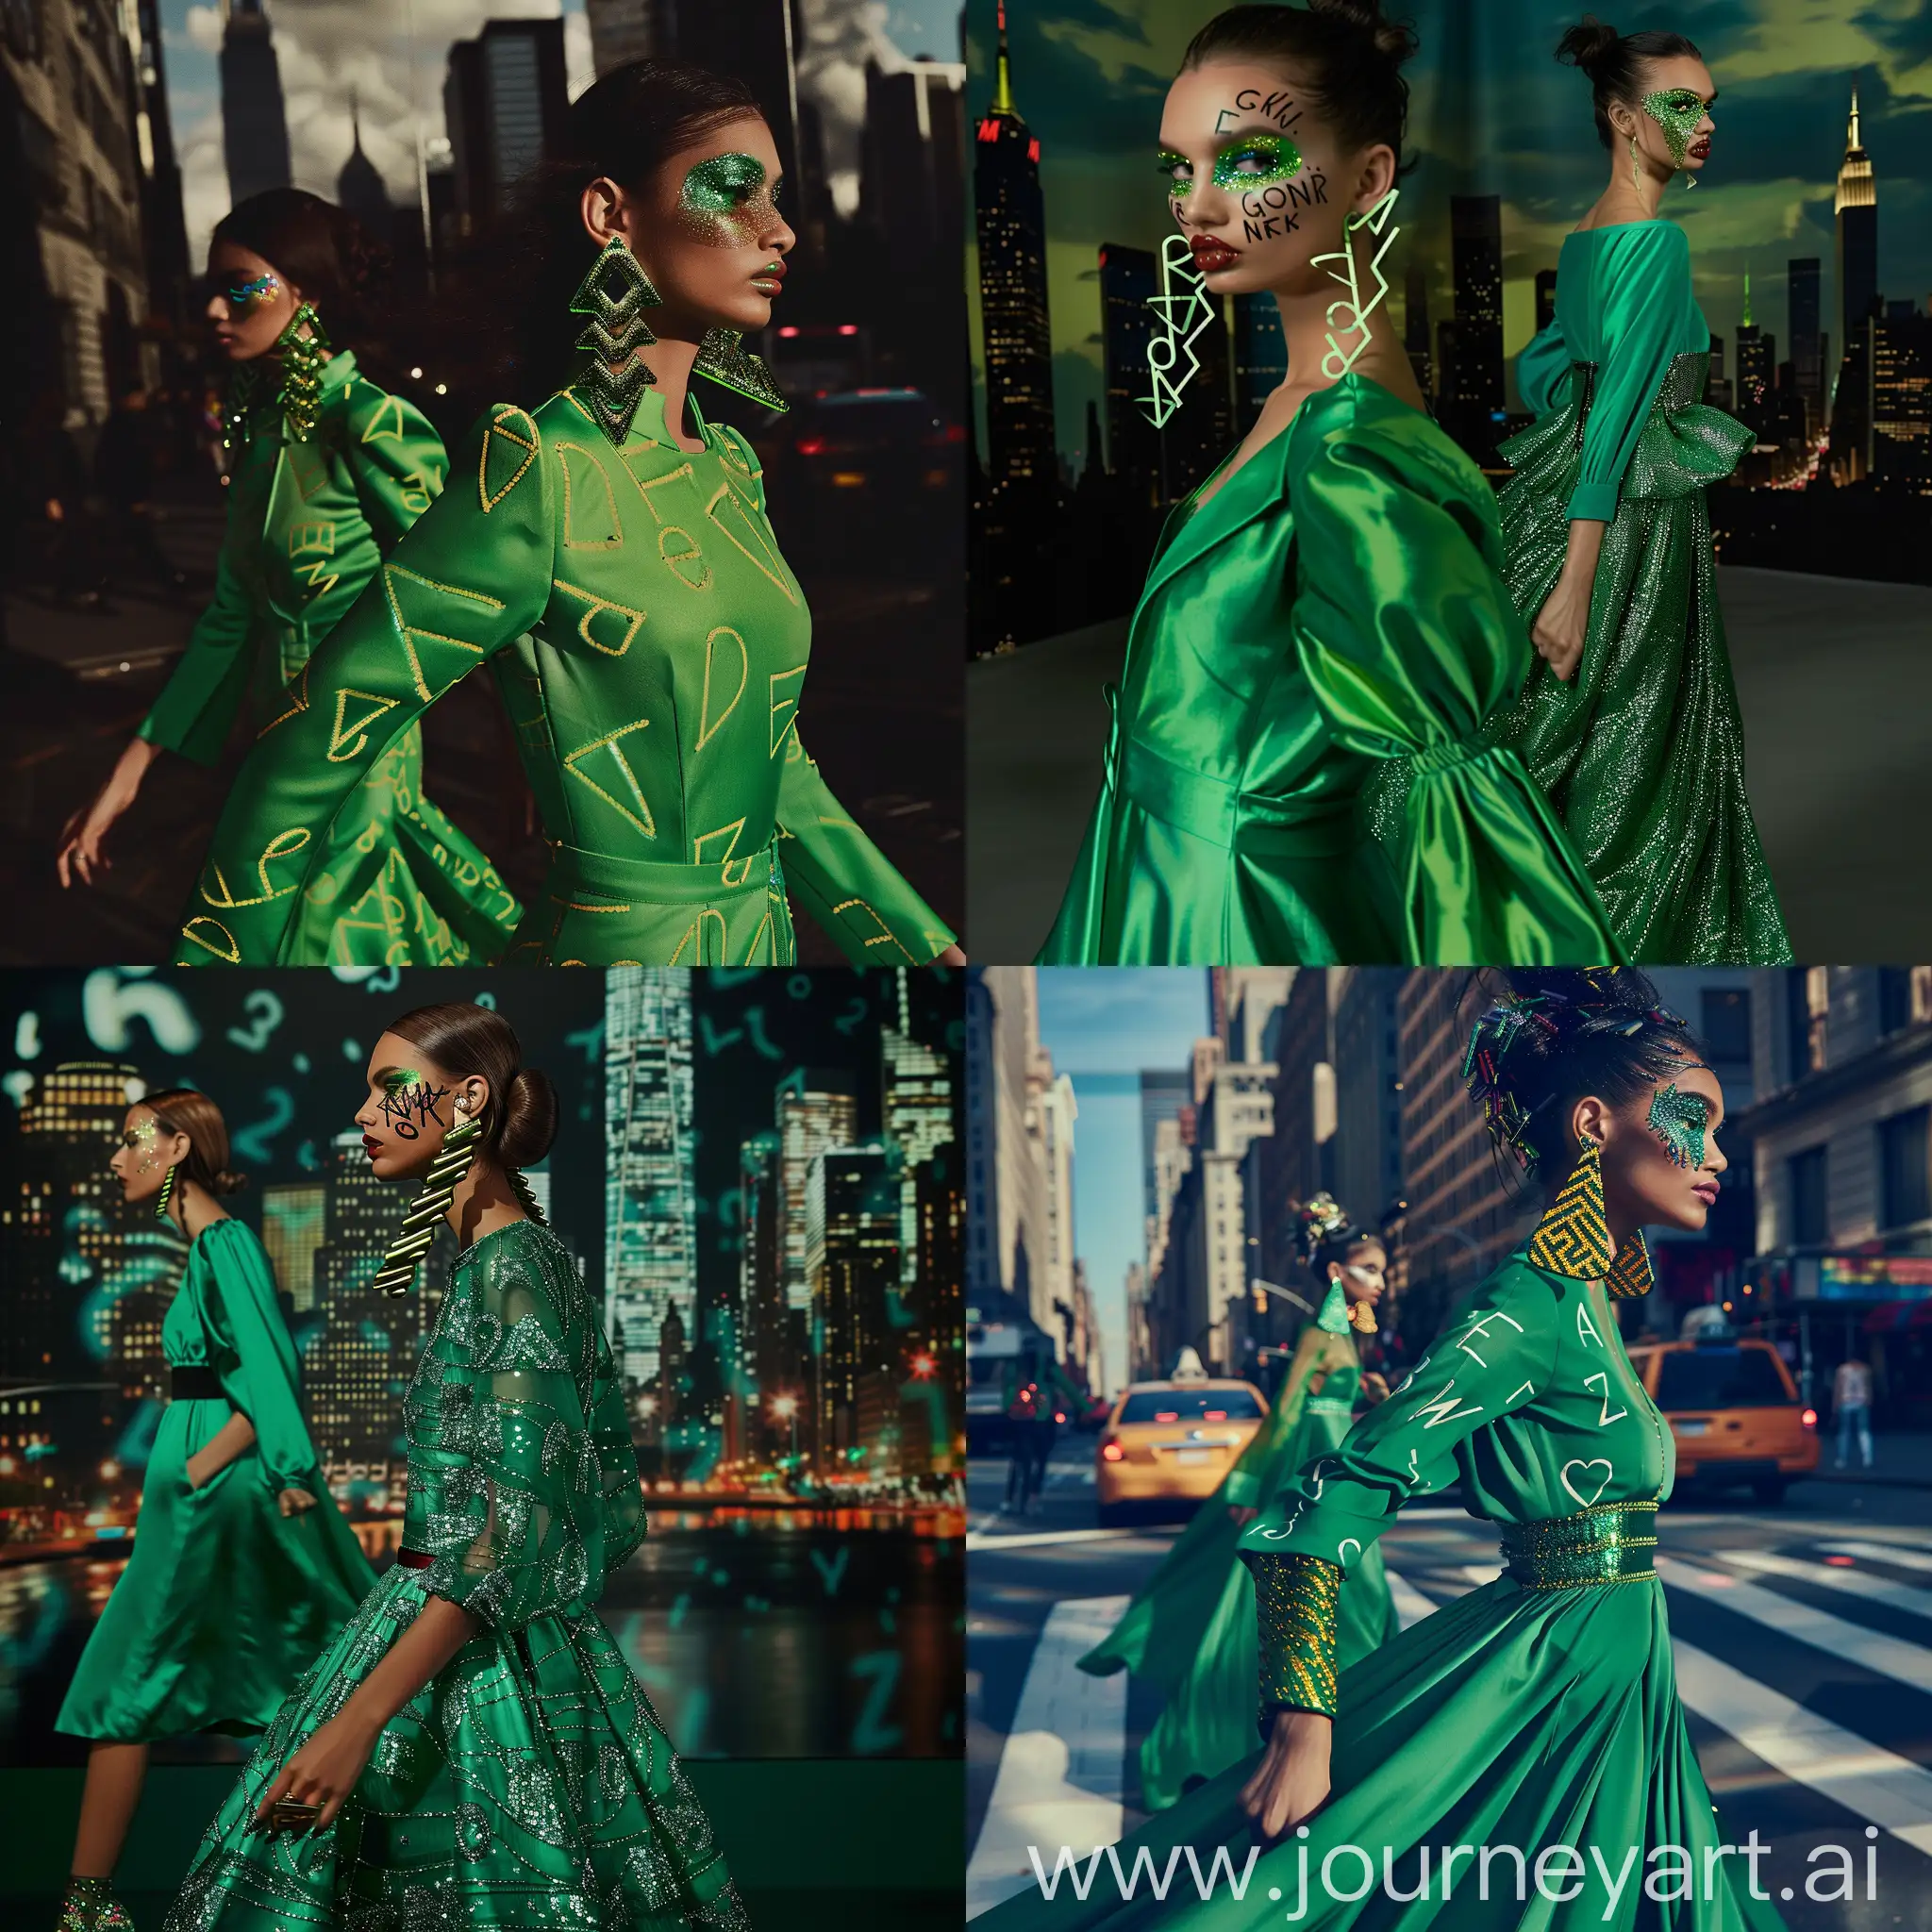 Elegant-Green-Dresses-with-Glittery-Makeup-in-New-York-City